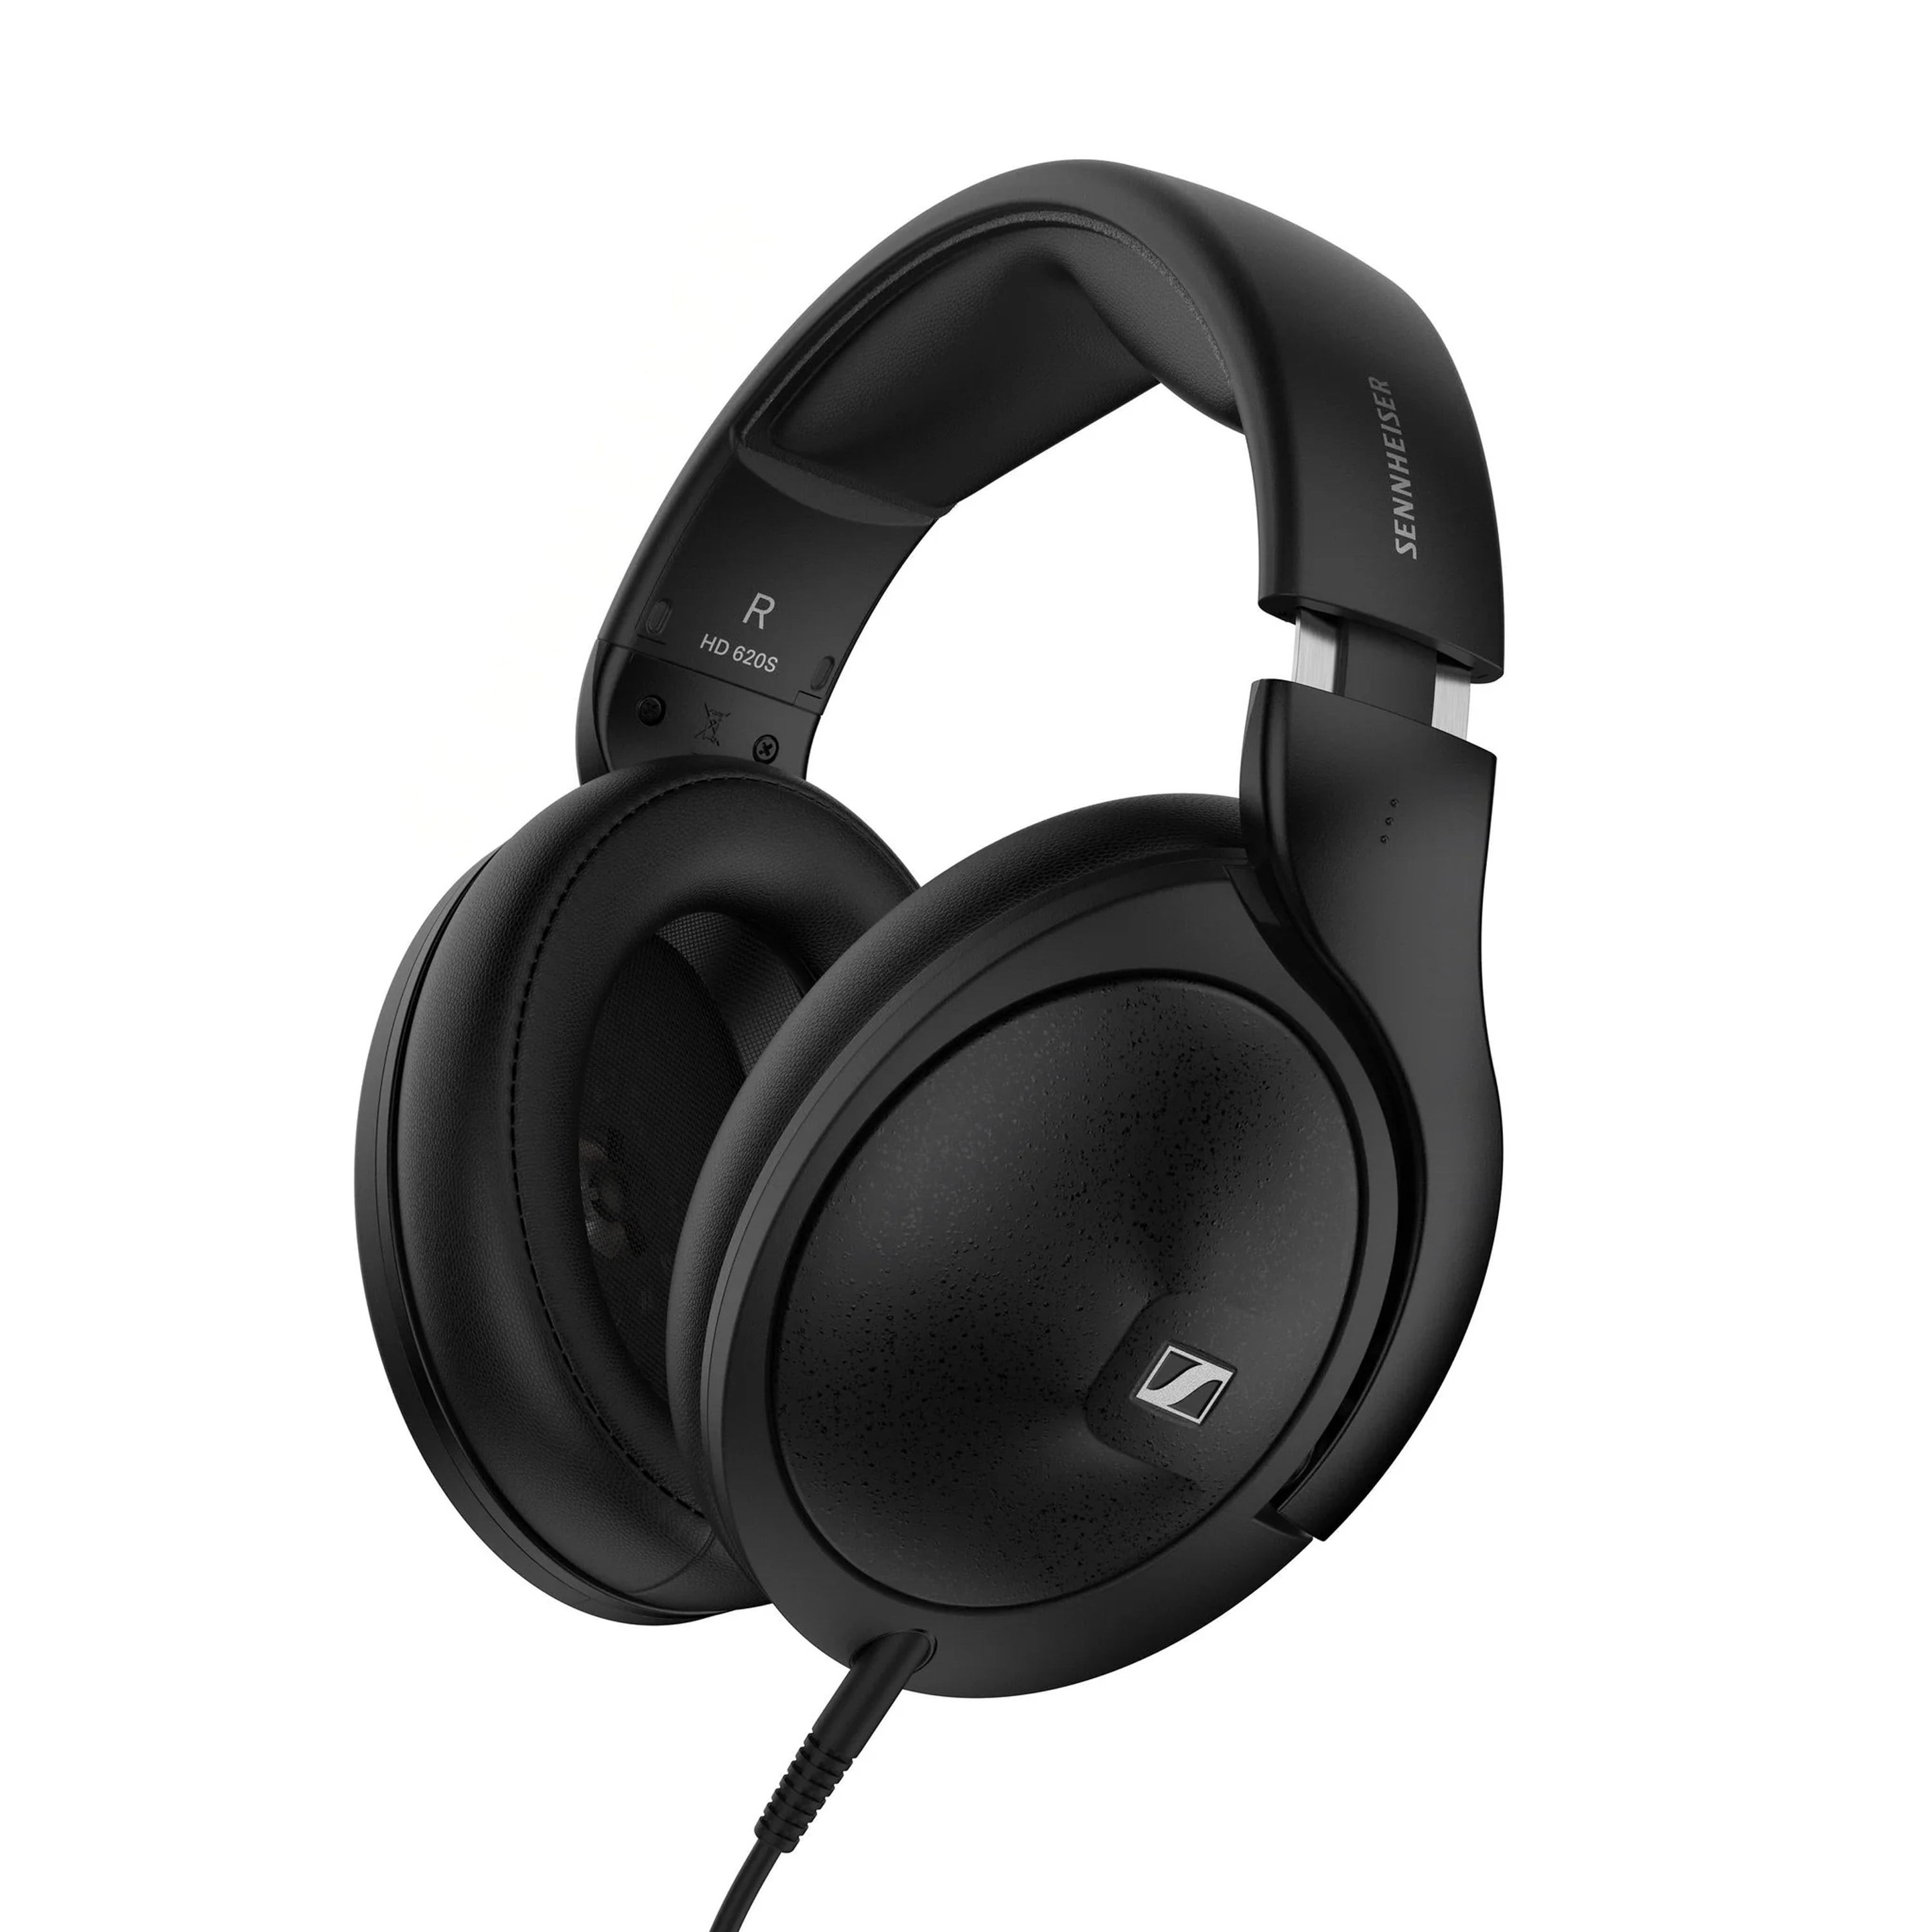 HD 620S Closed Back Wired Headphones Black